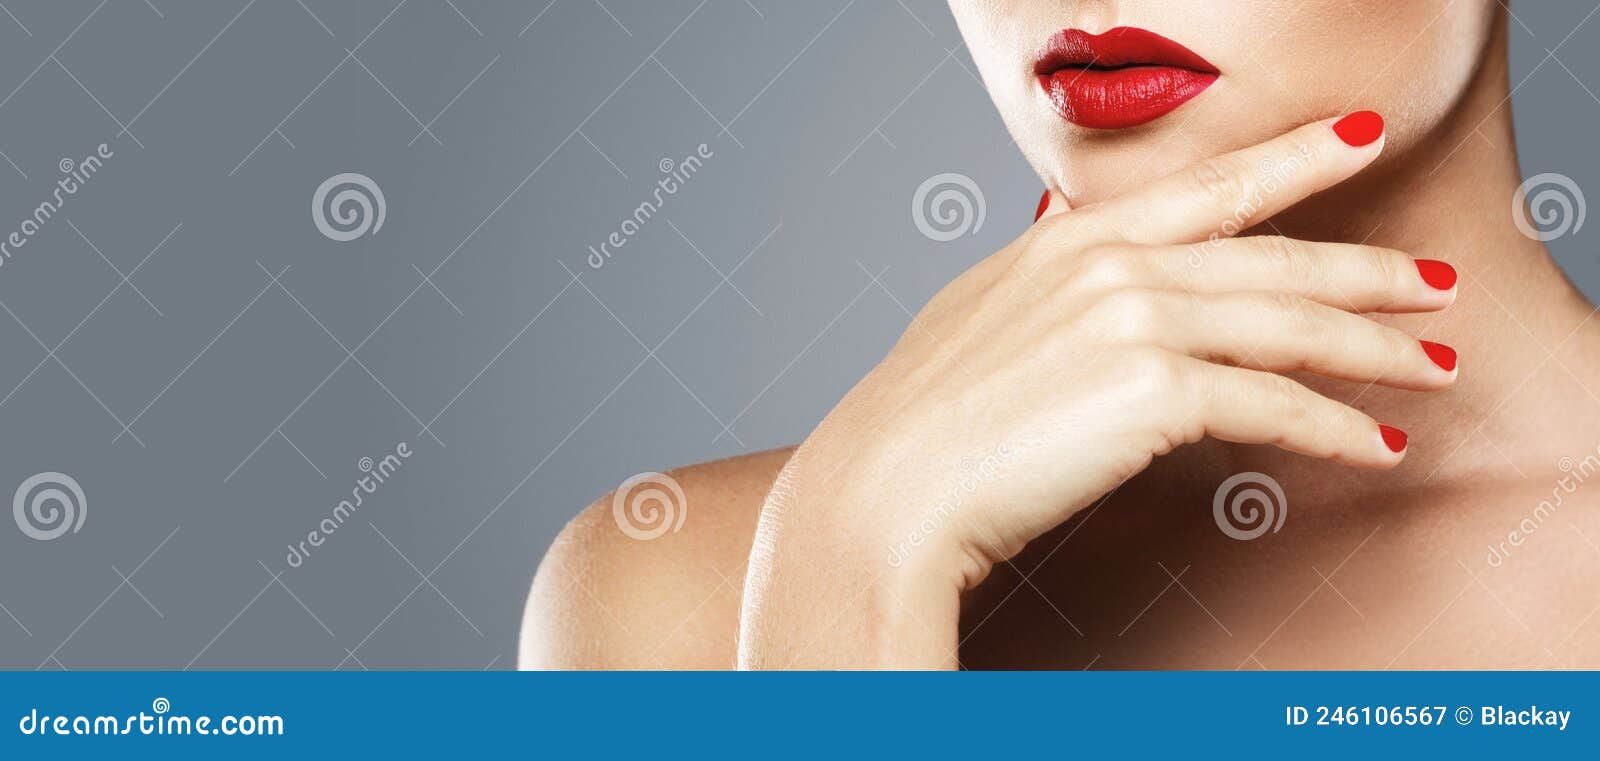 close-up of female mouth and nails with red manicure and lipstick.